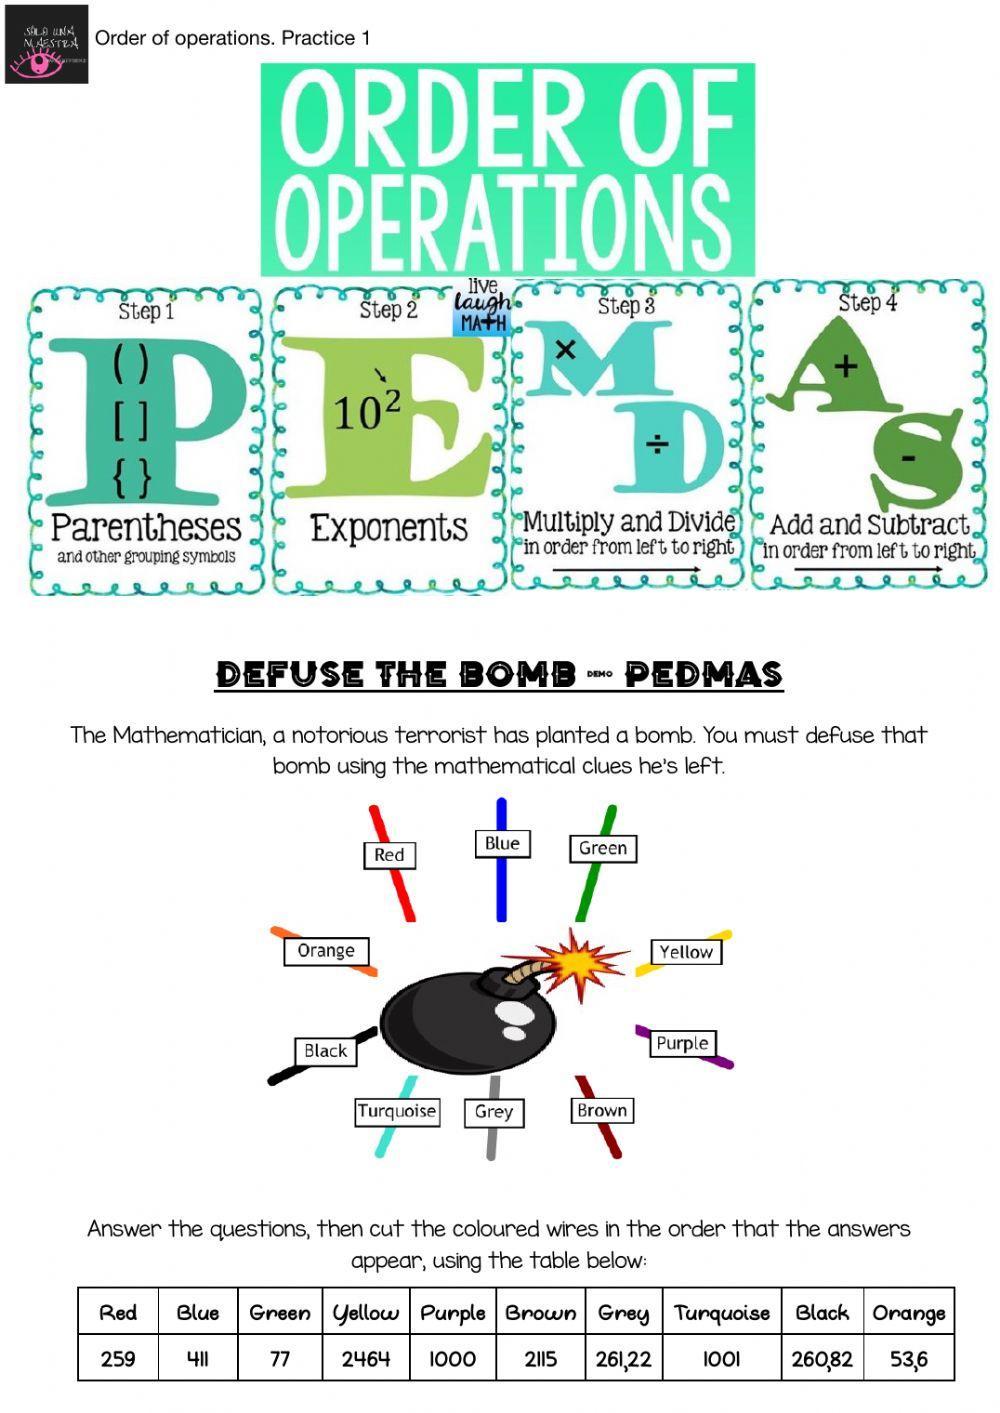 Order of operations. - Defuse the Bomb - PEDMAS